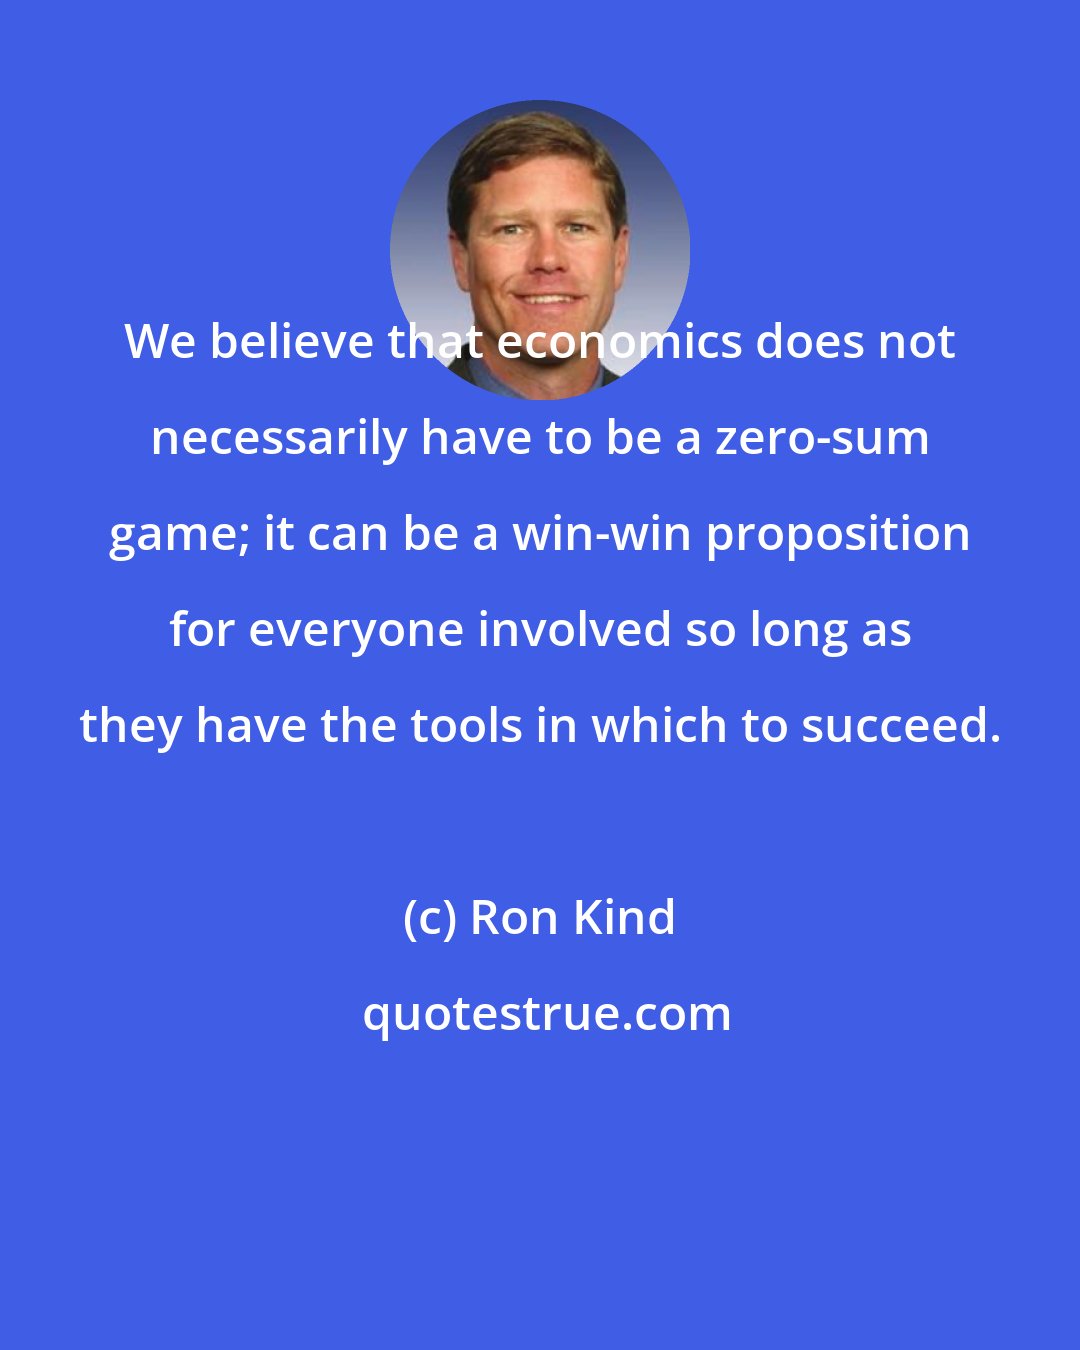 Ron Kind: We believe that economics does not necessarily have to be a zero-sum game; it can be a win-win proposition for everyone involved so long as they have the tools in which to succeed.